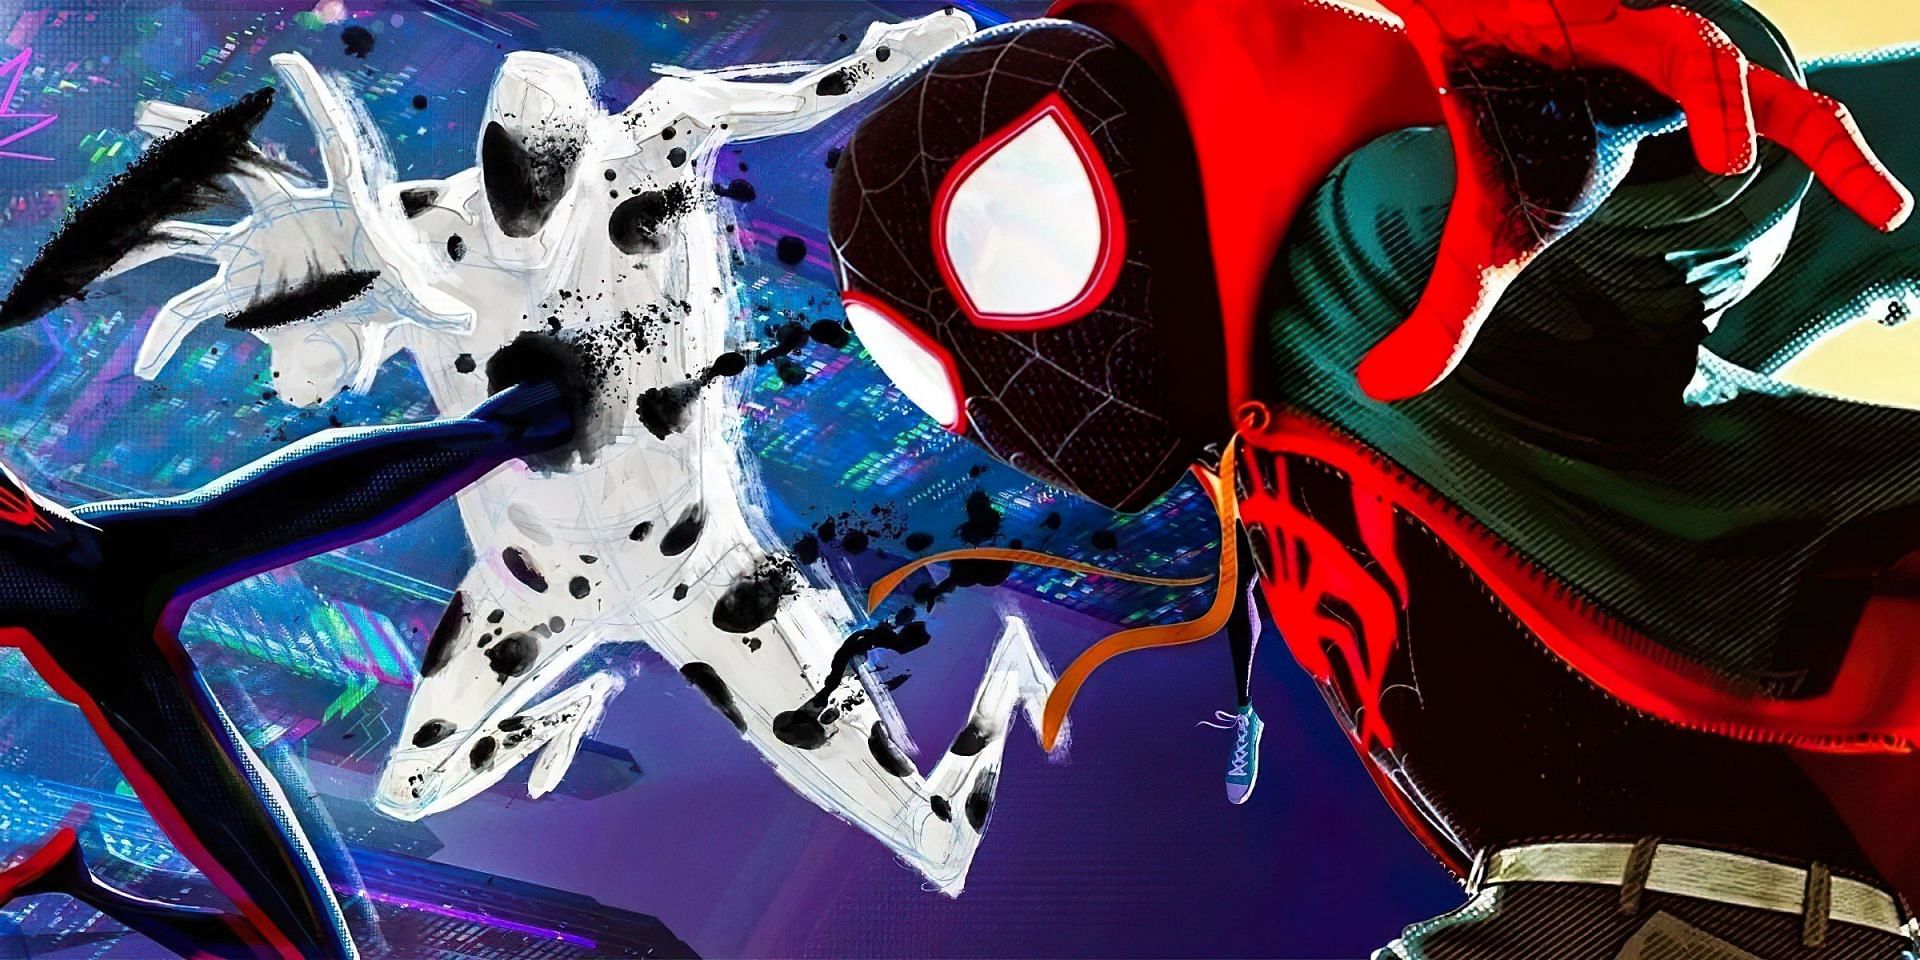 In Spider-Man: Across the Spider-Verse, The villain Spot is one of the main antagonists. (Image via Marvel)